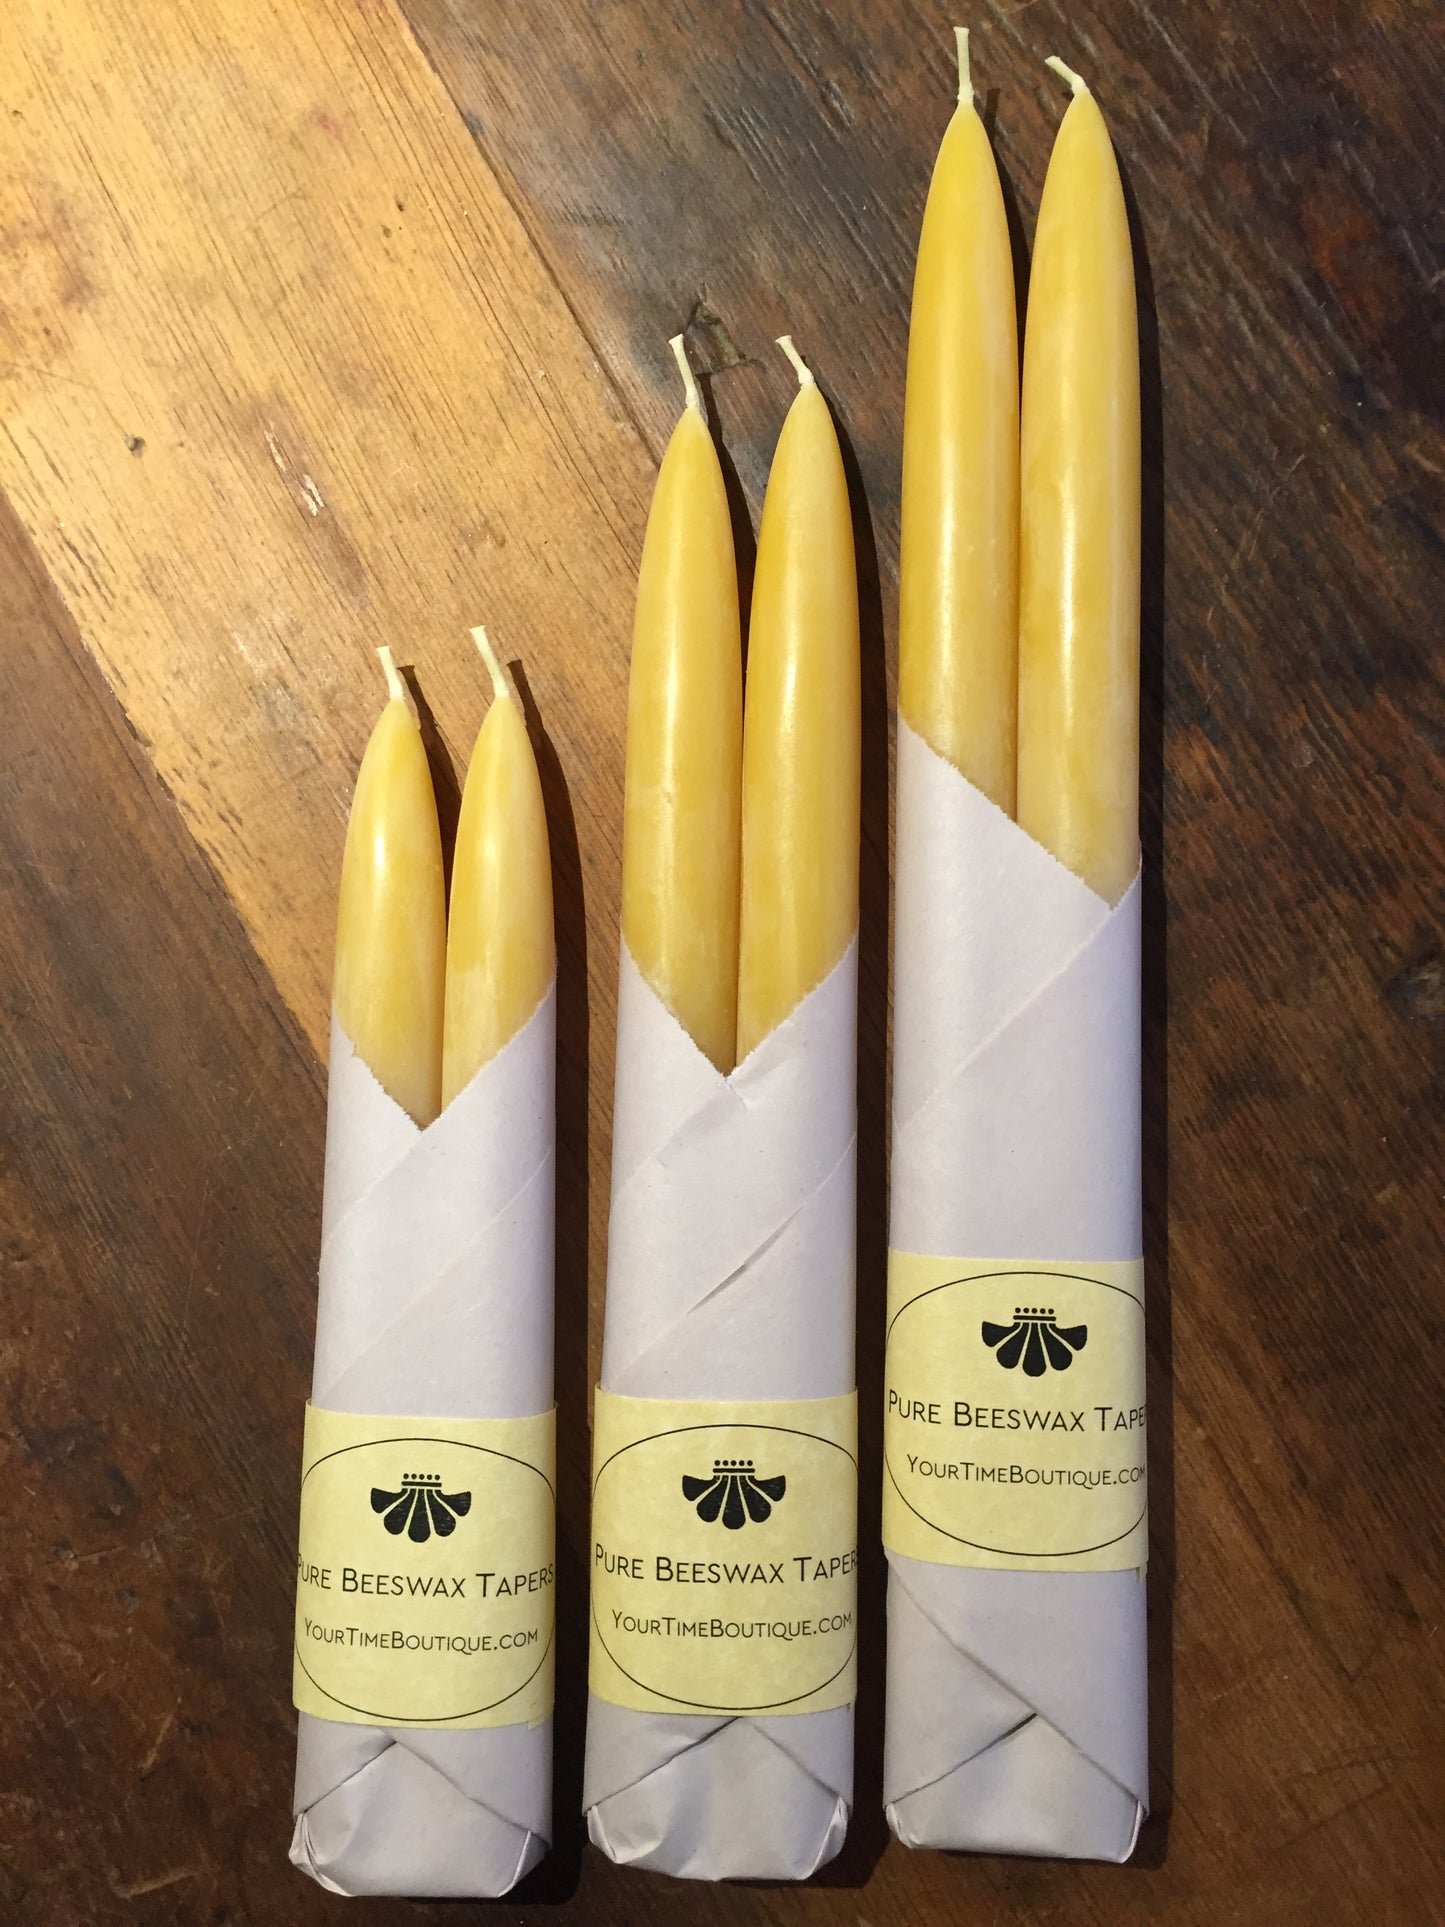 Beeswax Candles - 12 INCH TAPER PAIR